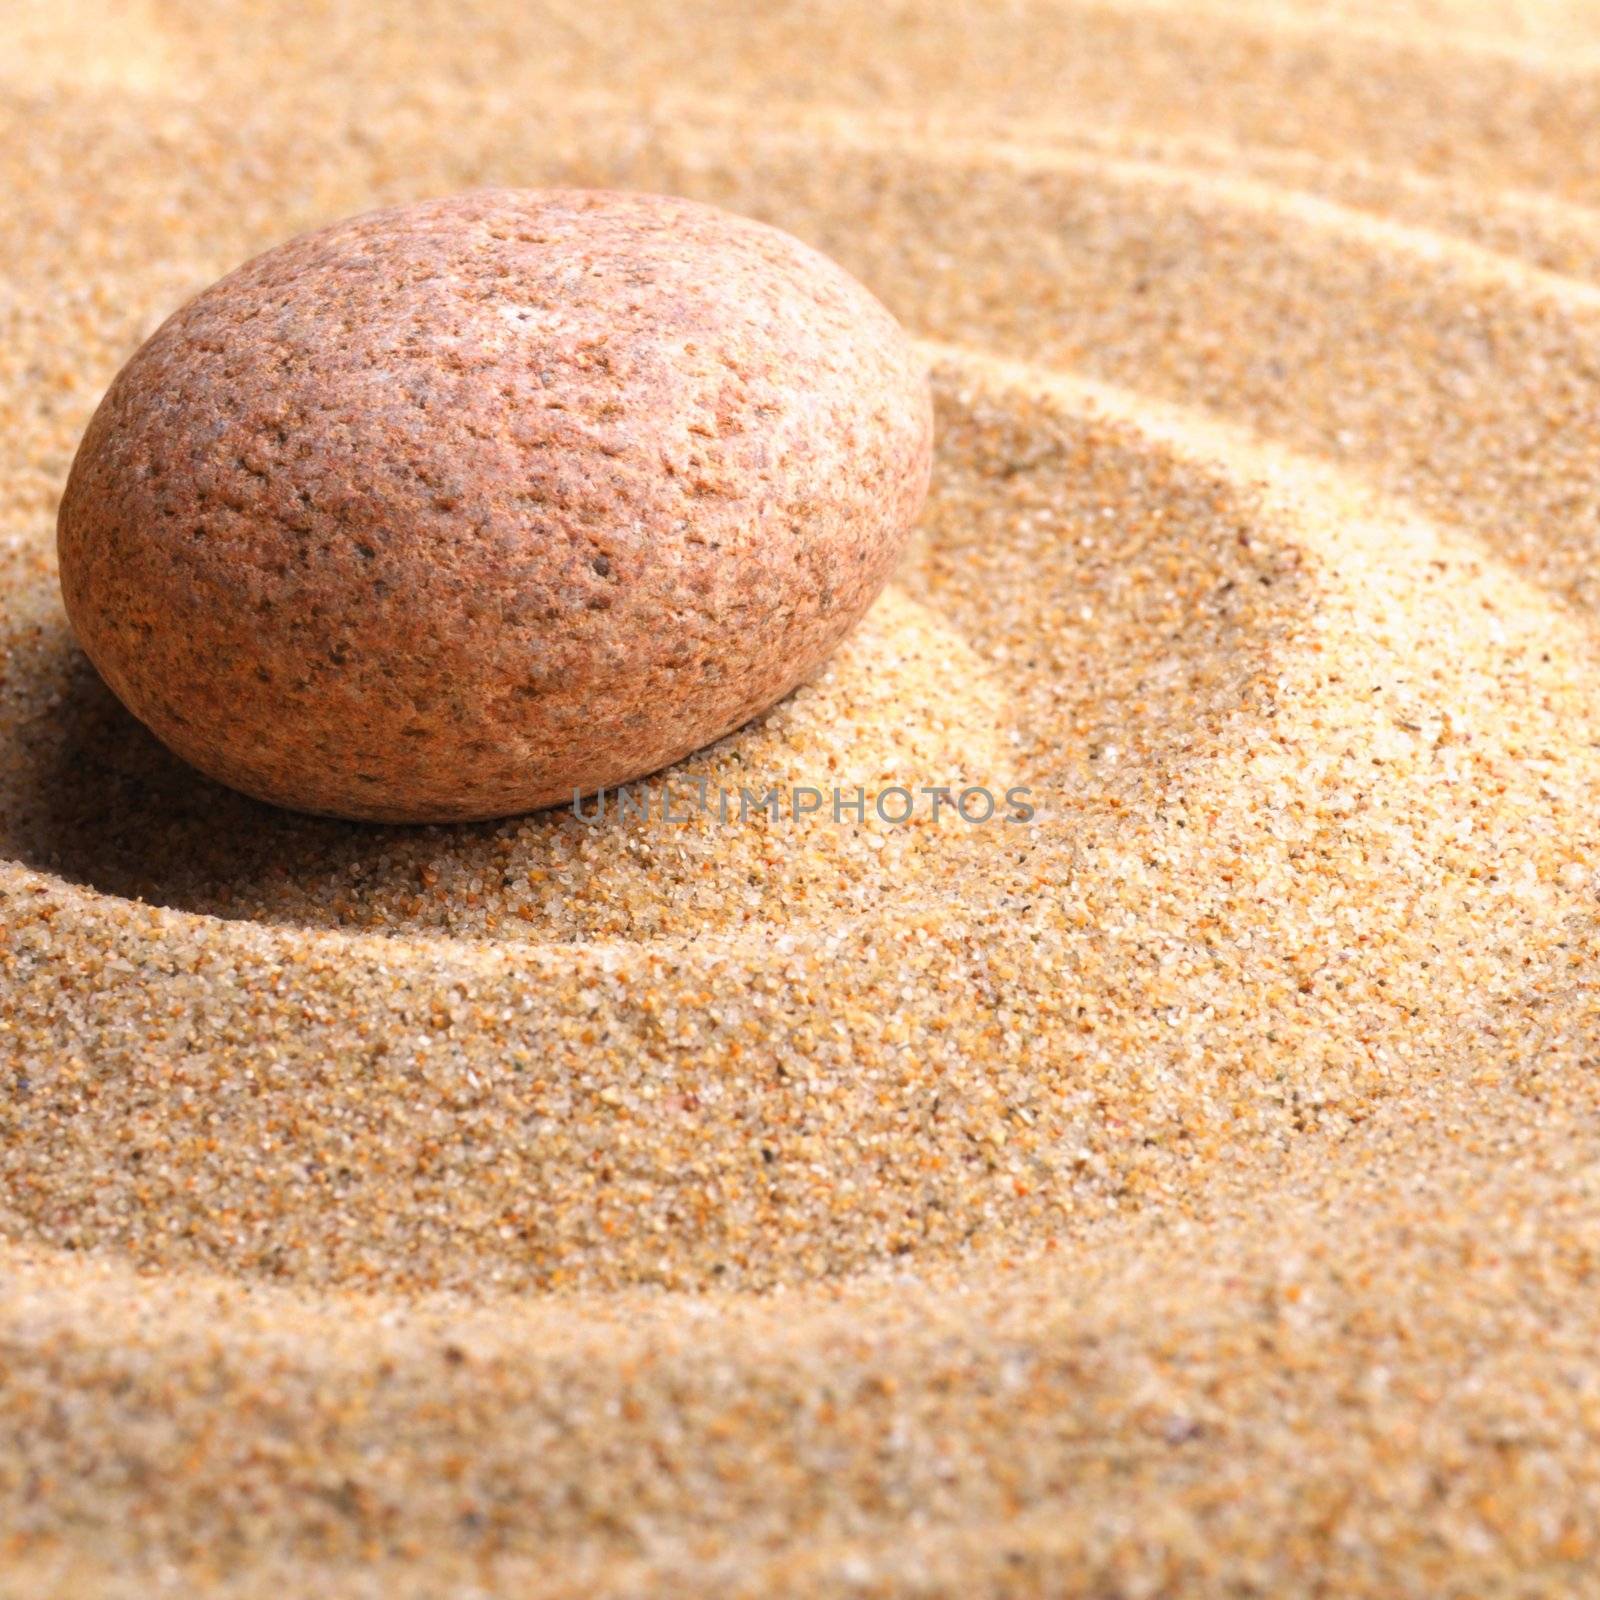 zen garden with stone or pebble on sand with leaf